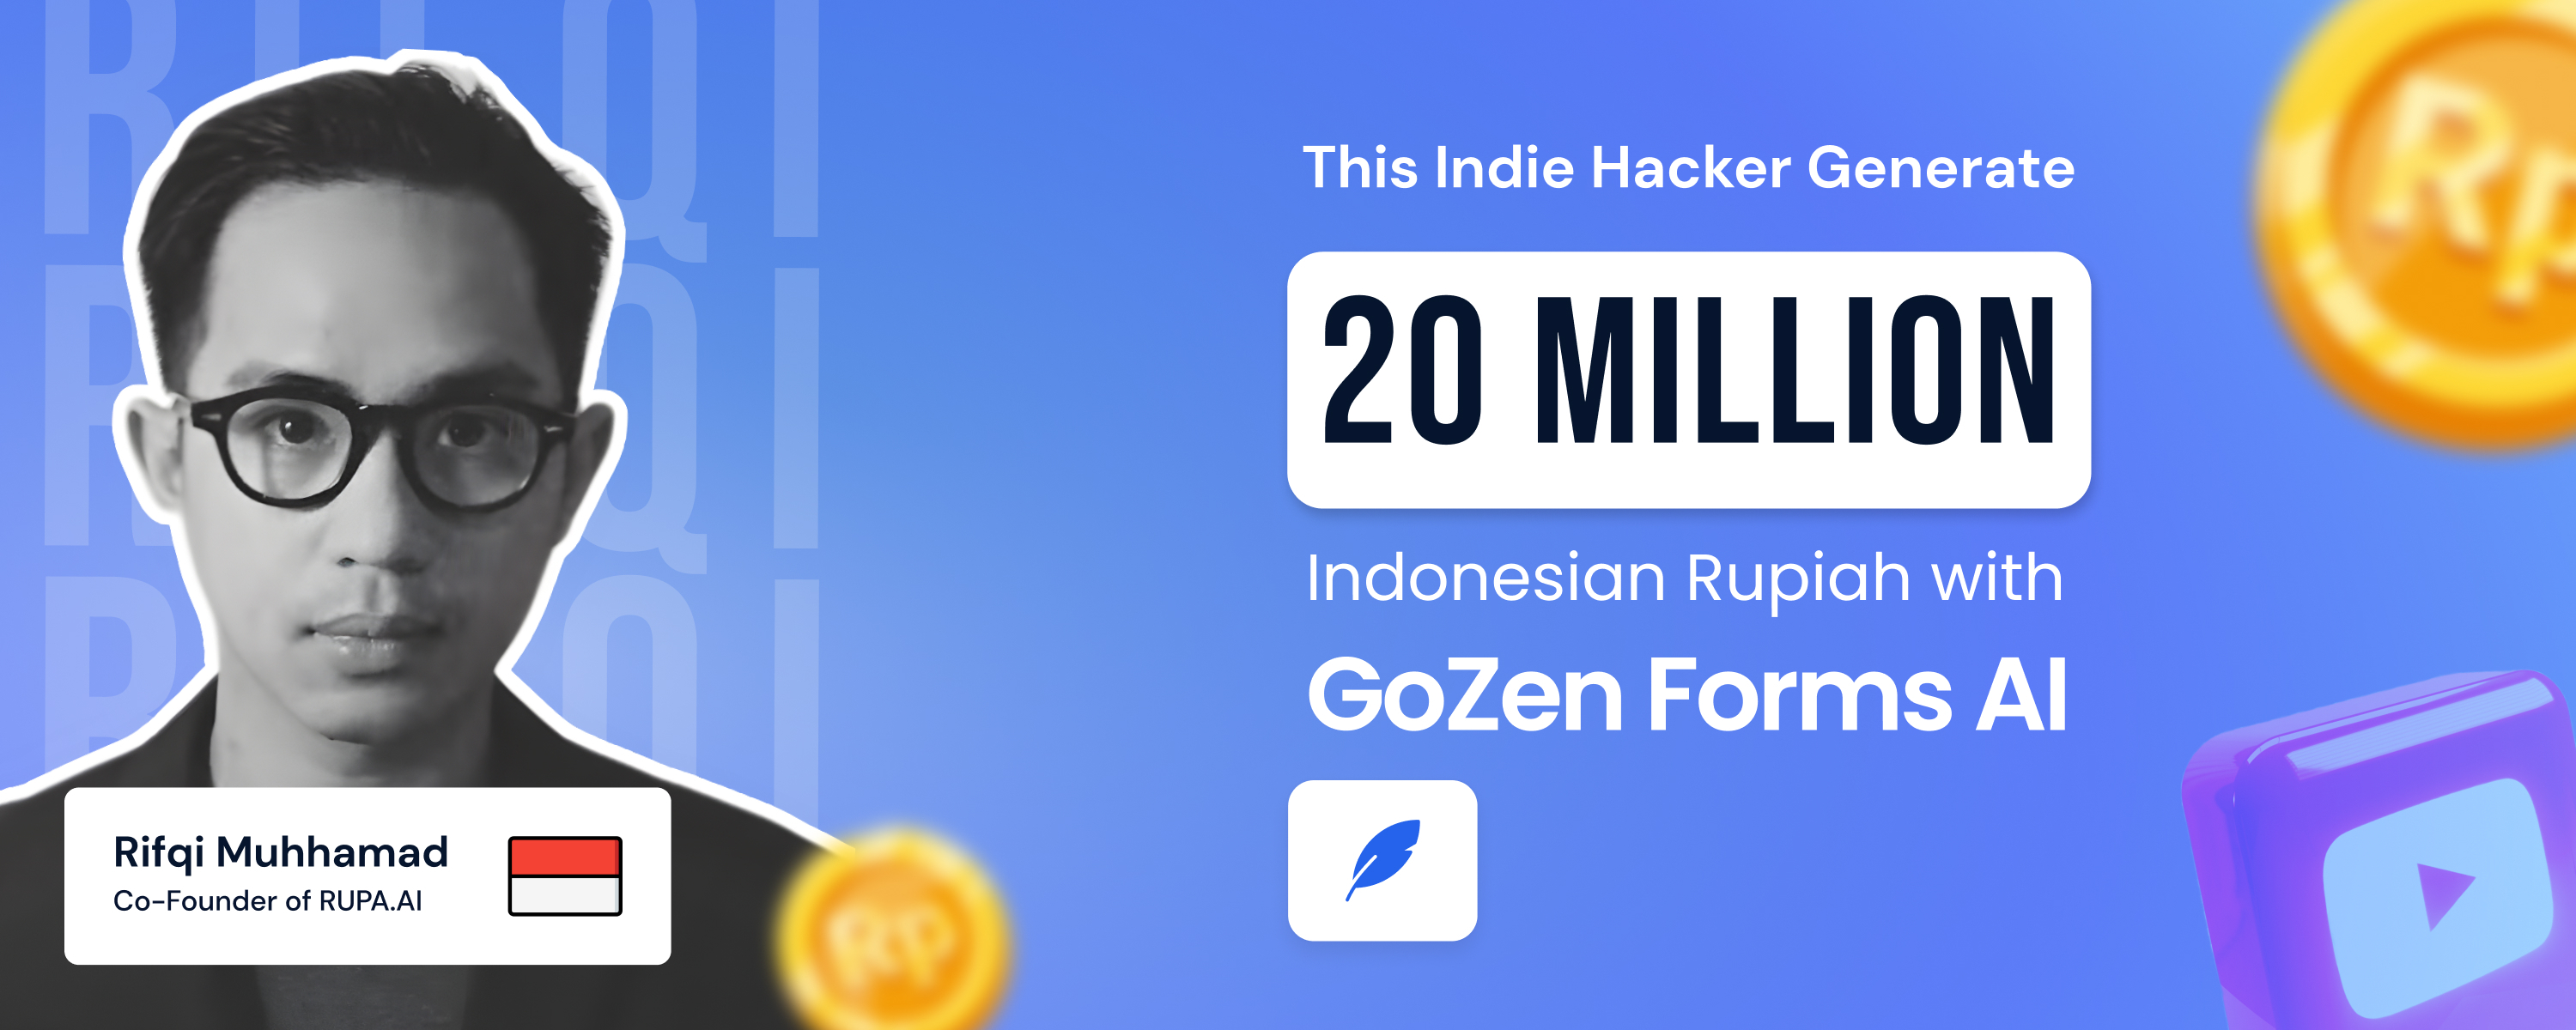 He generates 20 million IDR (2,30,52,675 exactly) using GoZen Forms AI - Here's how